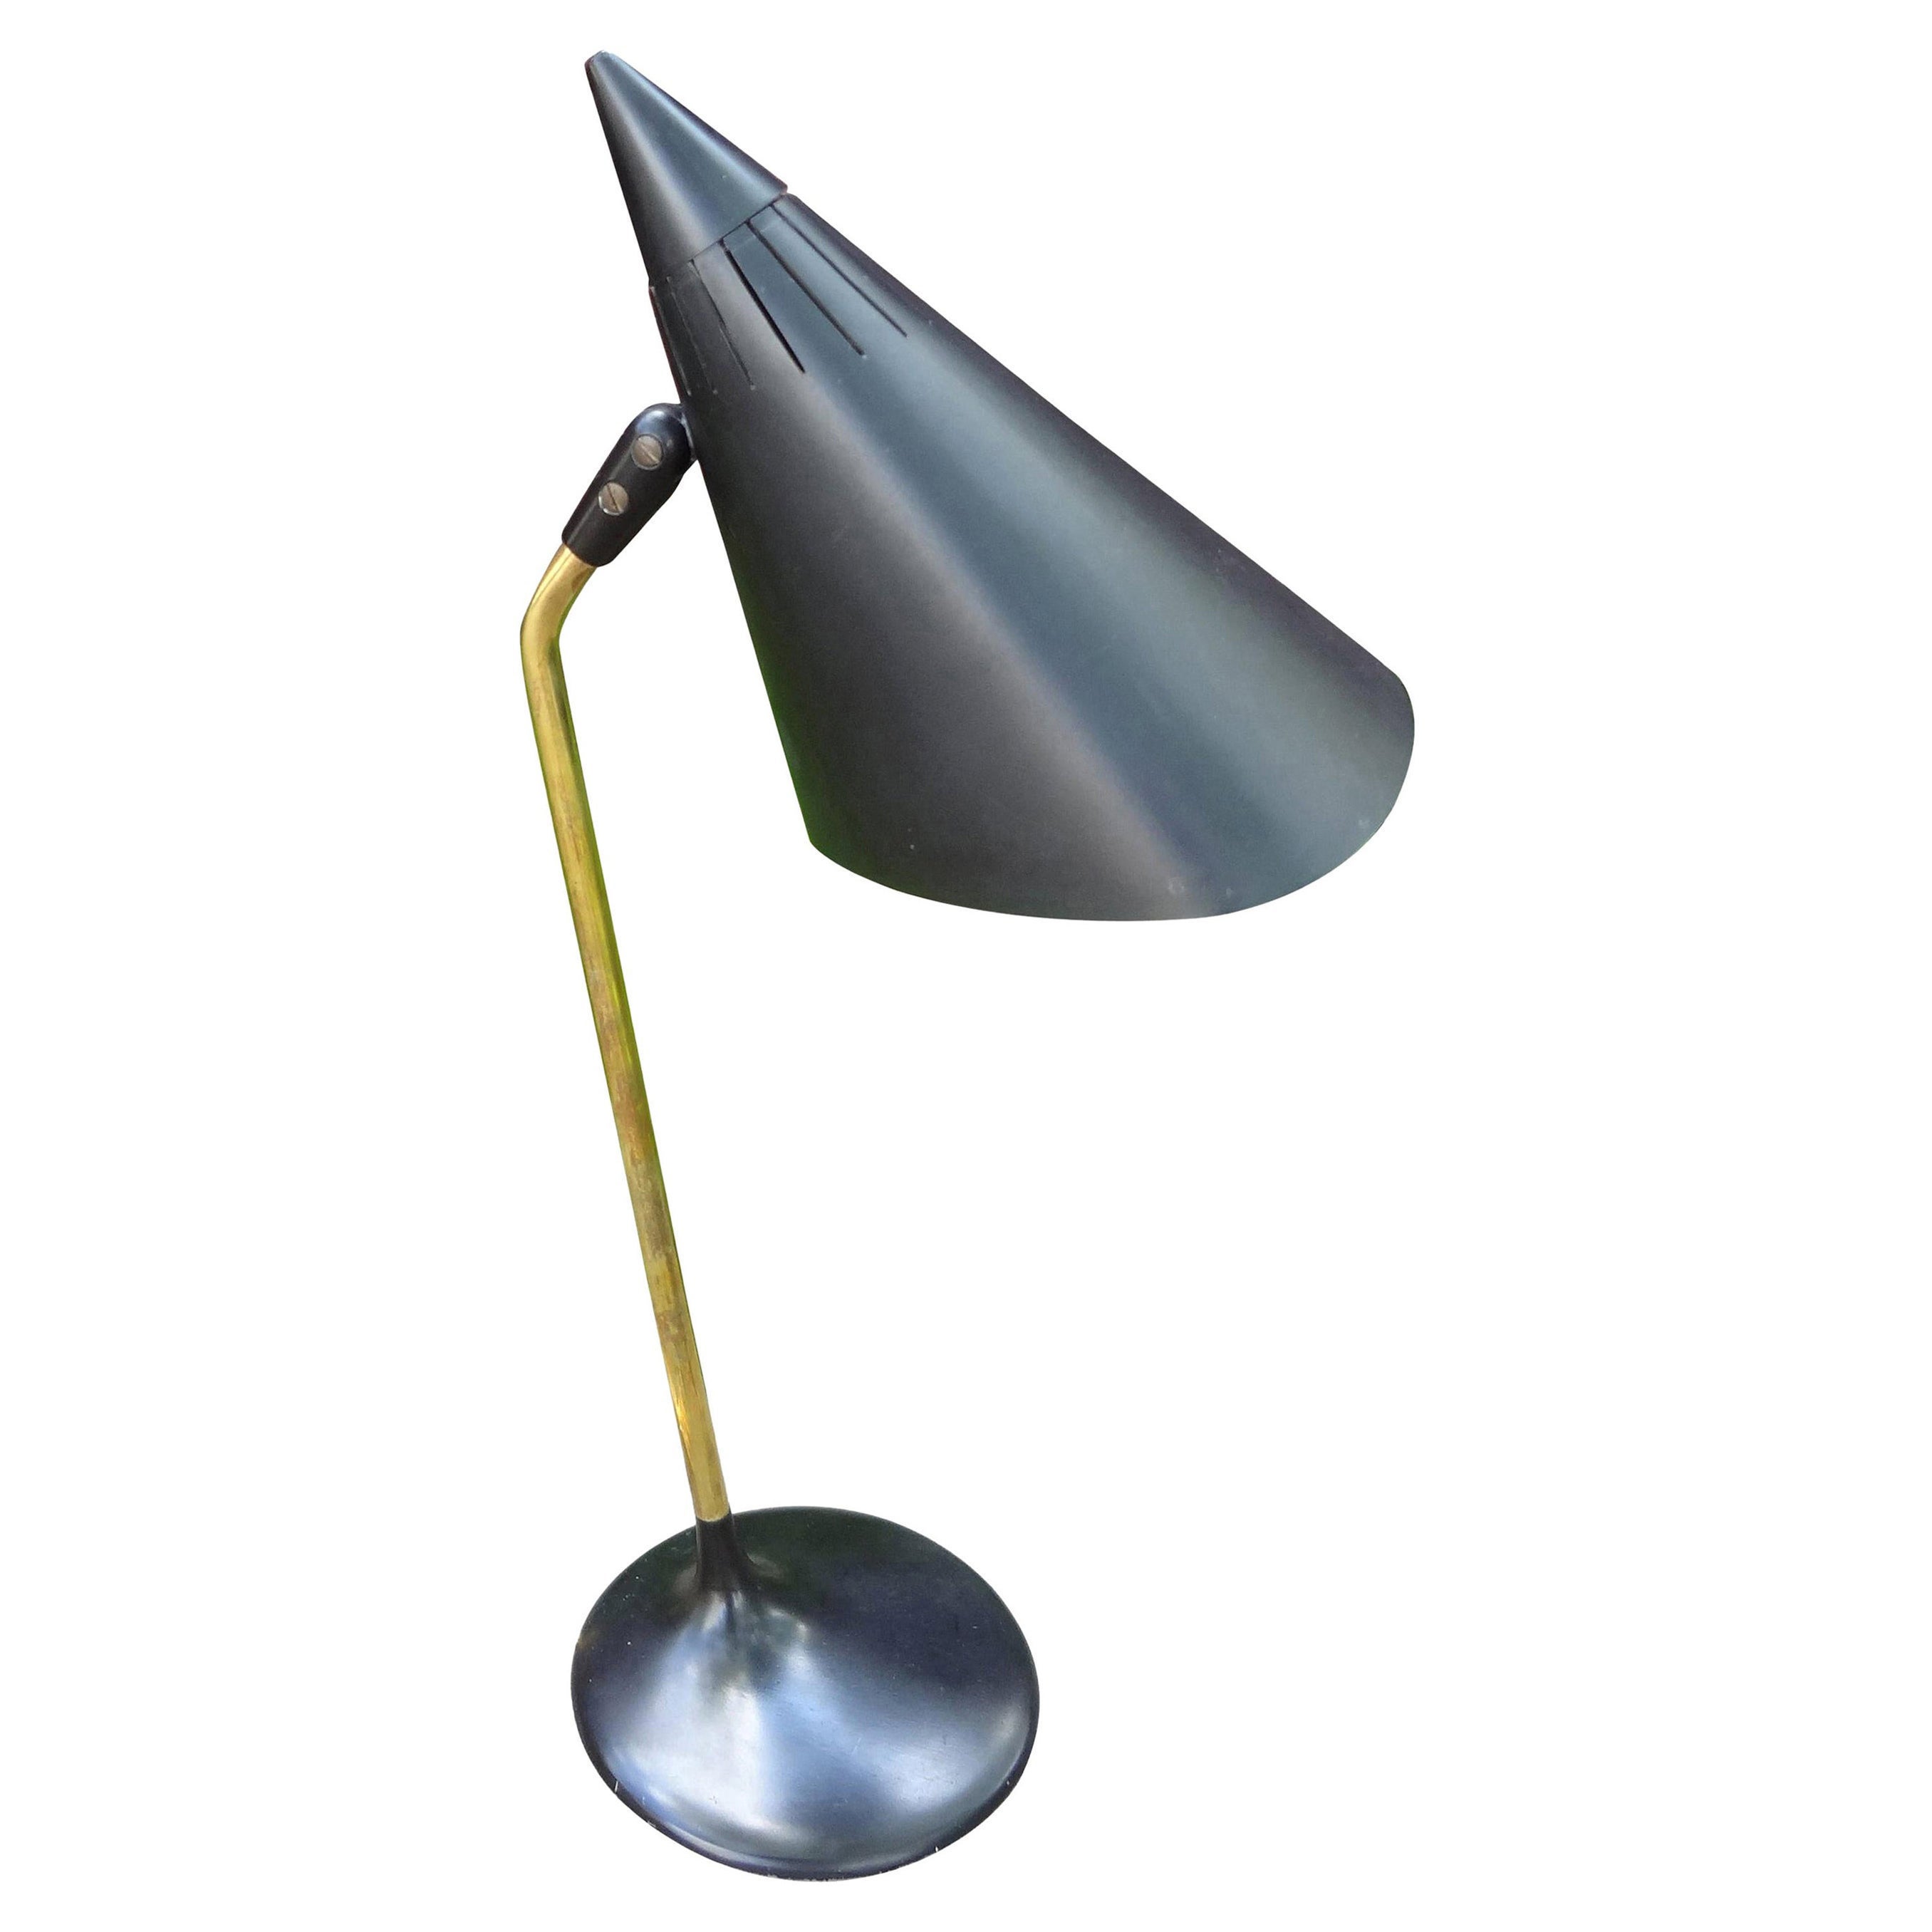 Modernist Brass Desk Lamp with Cone Shaped Shade